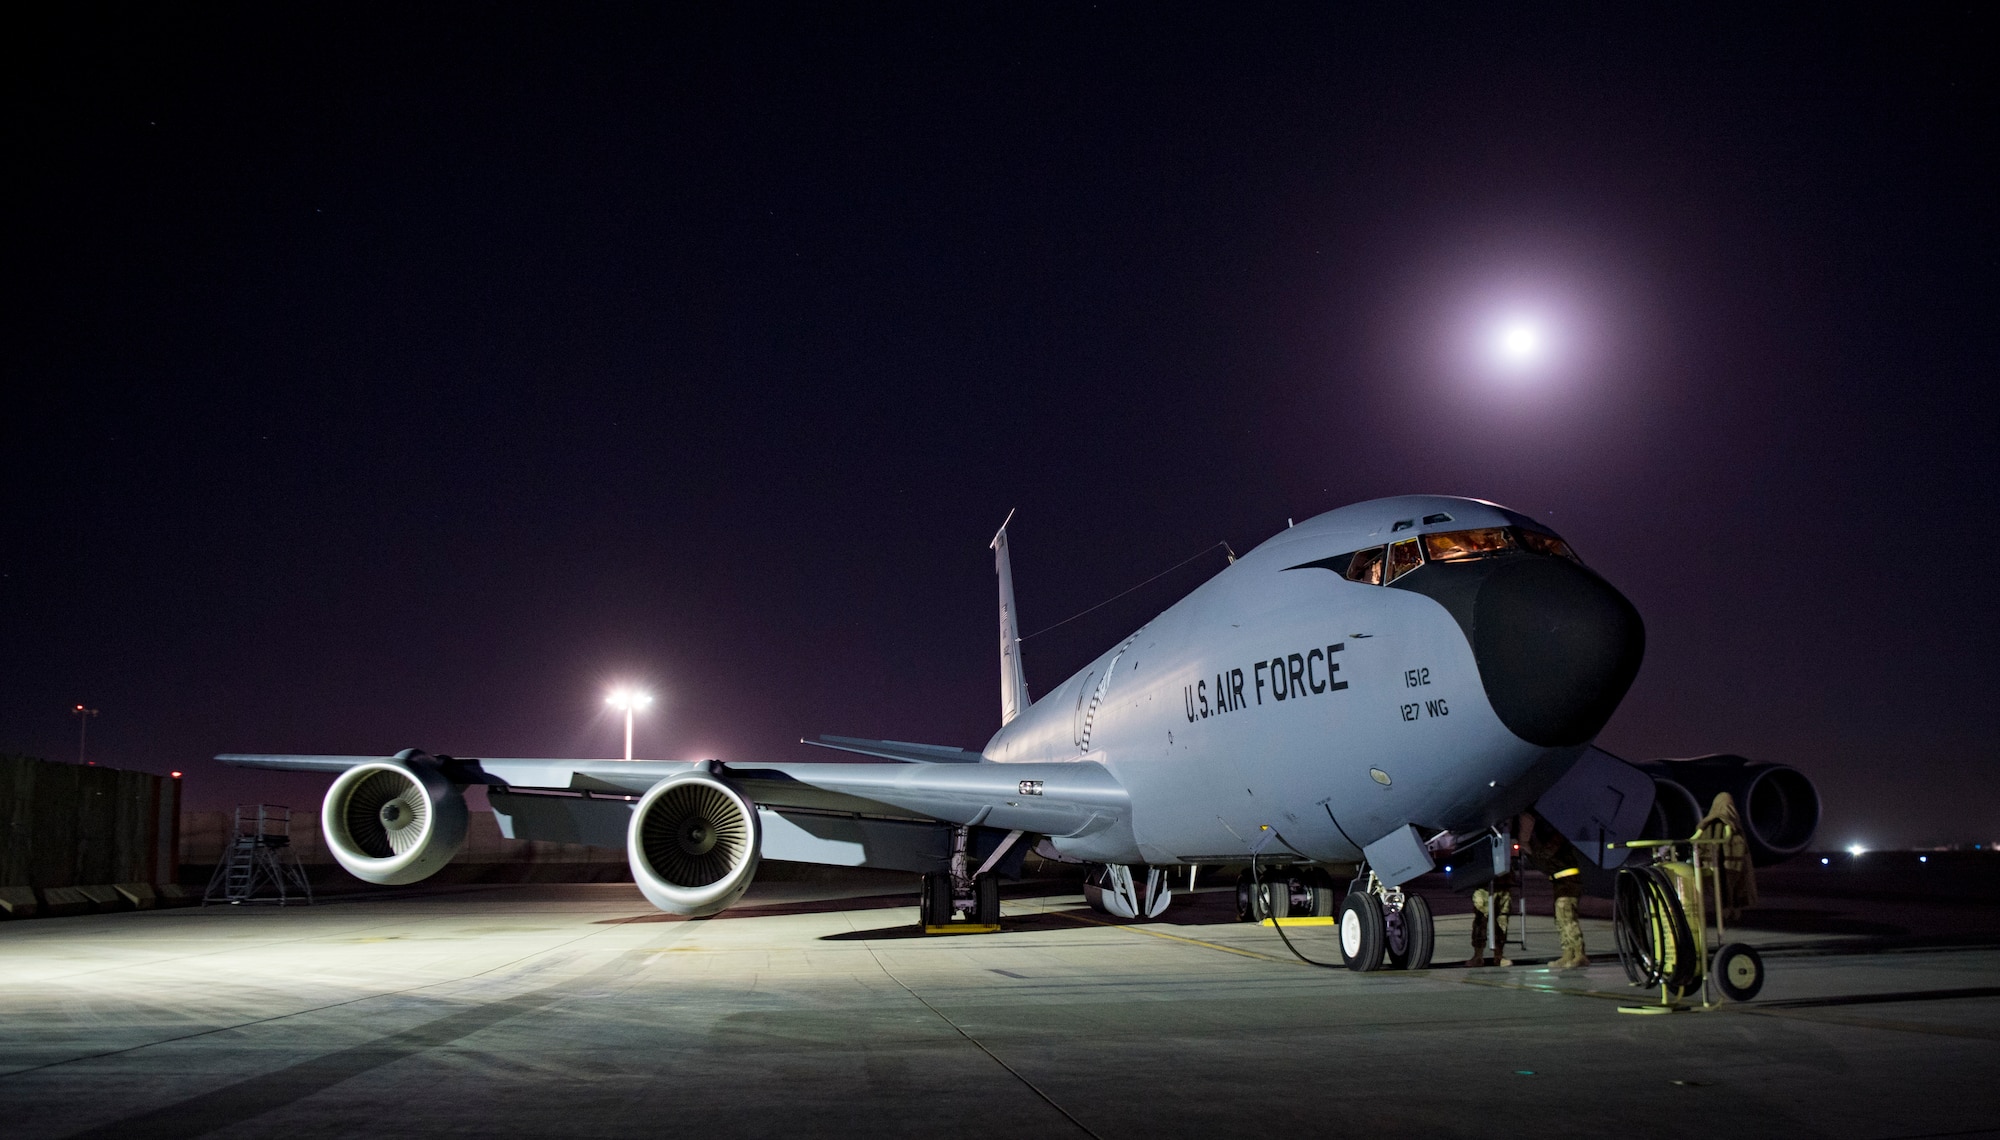 A U.S. Air Force KC-135 Stratotanker assigned to the 340th Expeditionary Air Refueling Squadron sits on the ramp Jan. 22, 2019, at Kandahar Air Field, Afghanistan. The 340th EARS maintains a 24/7 presence in the Operation Freedom’s Sentinel area of responsibility, supporting U.S. and coalition aircraft in various operations in countries such as Iraq, Syria and Afghanistan. (U.S. Air Force photo/Staff Sgt. Clayton Cupit)